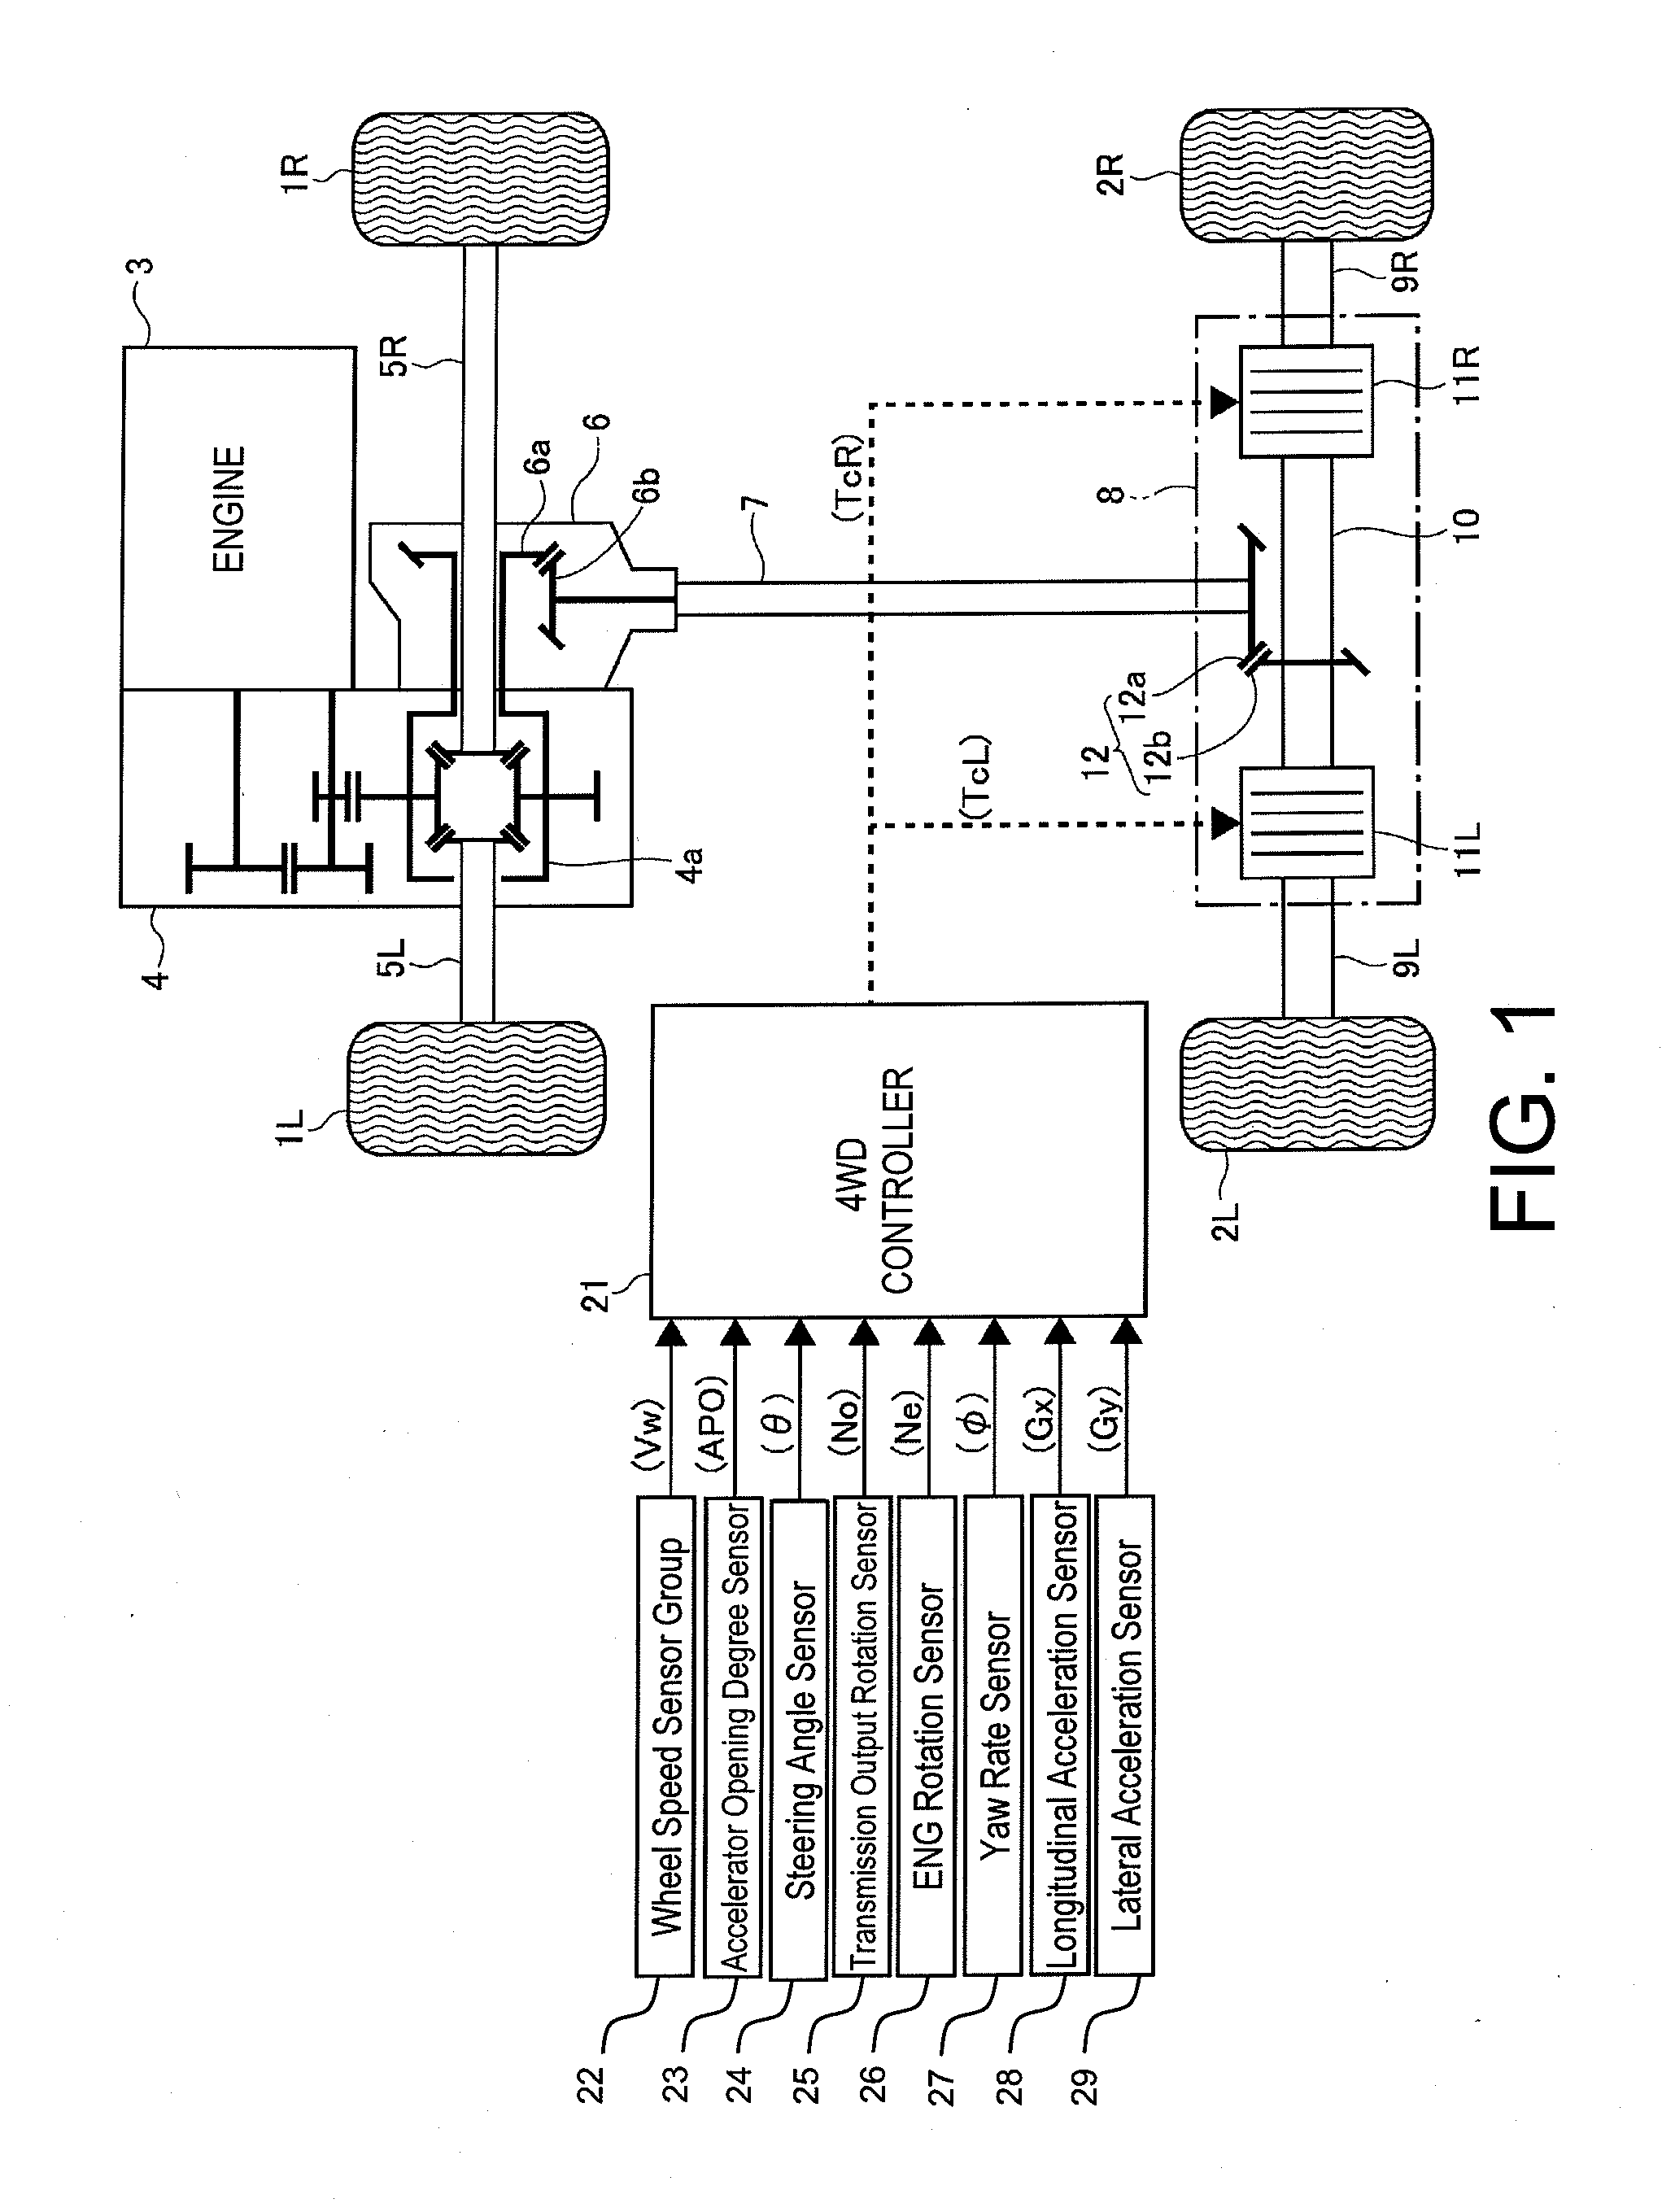 Left-right wheel drive force distribution control apparatus for a vehicle